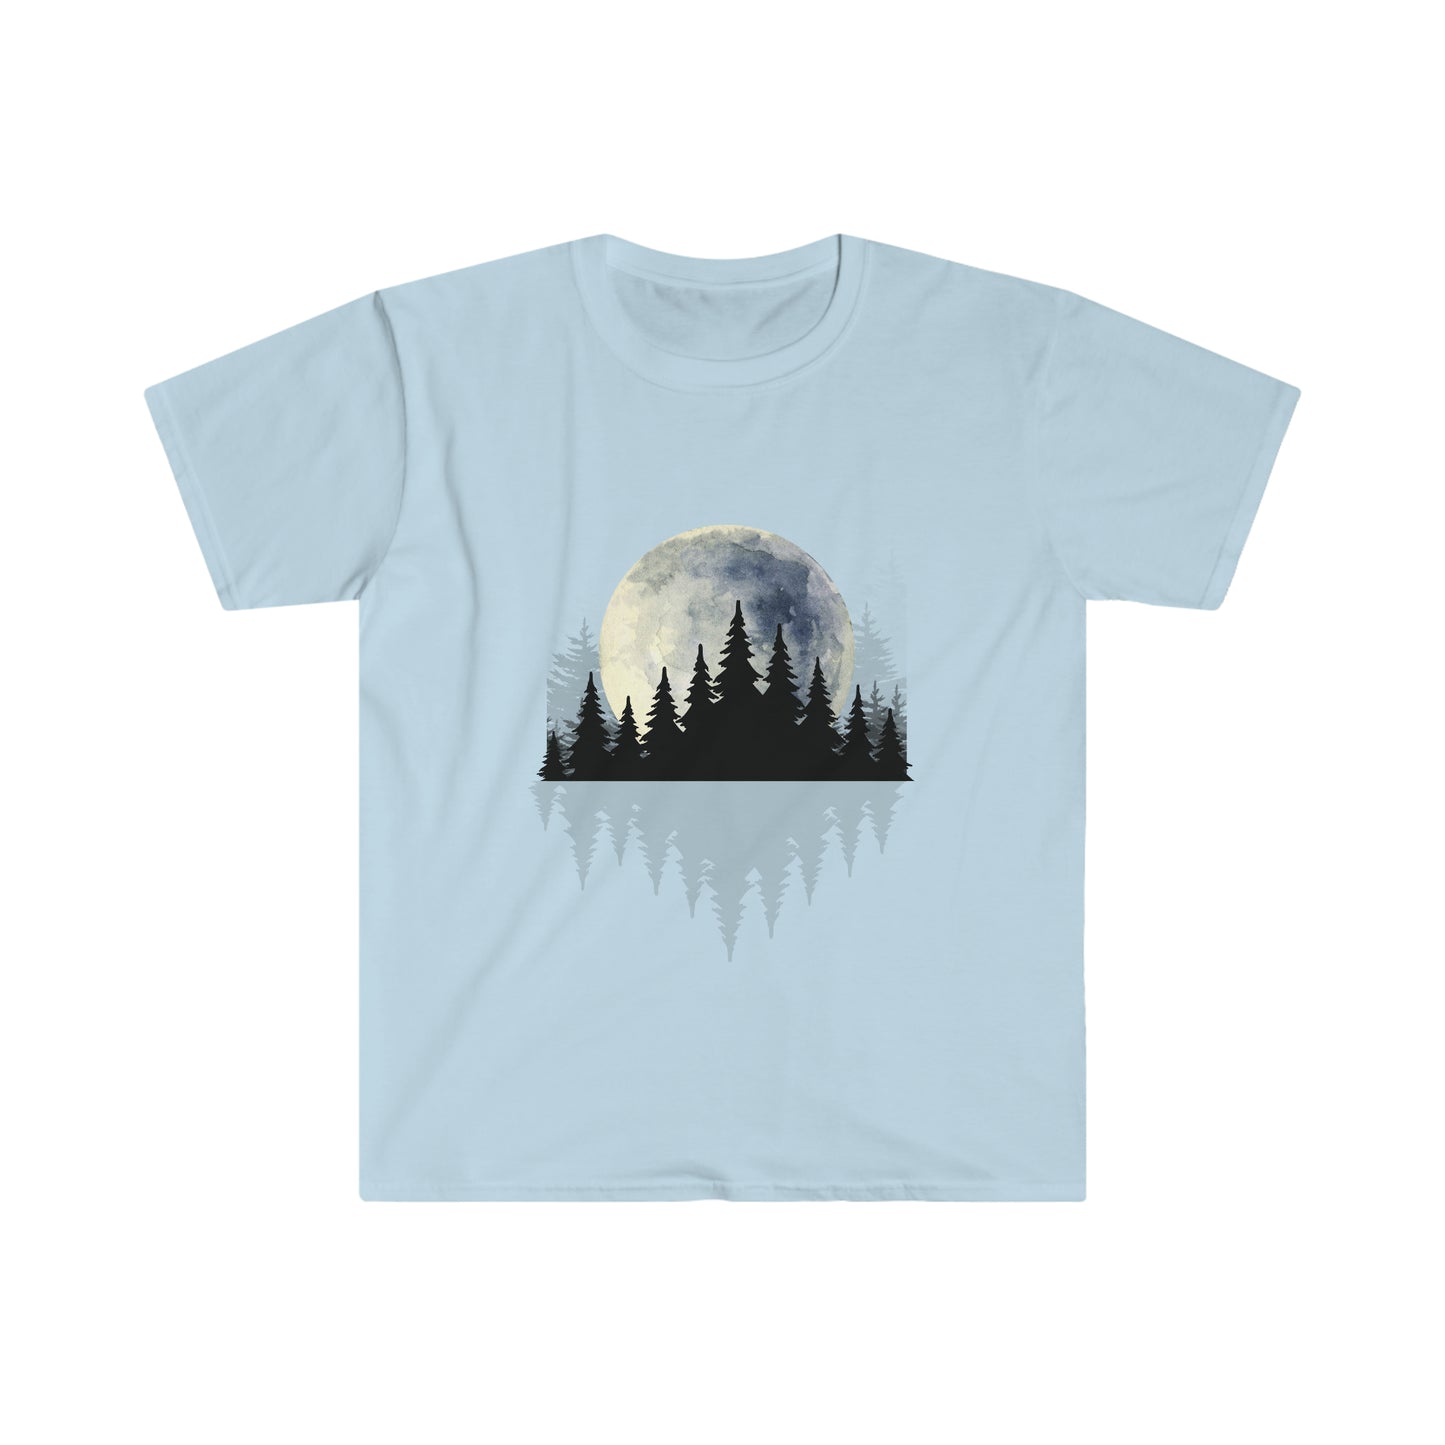 Full Moon Beyond The Forest - Urban Camper